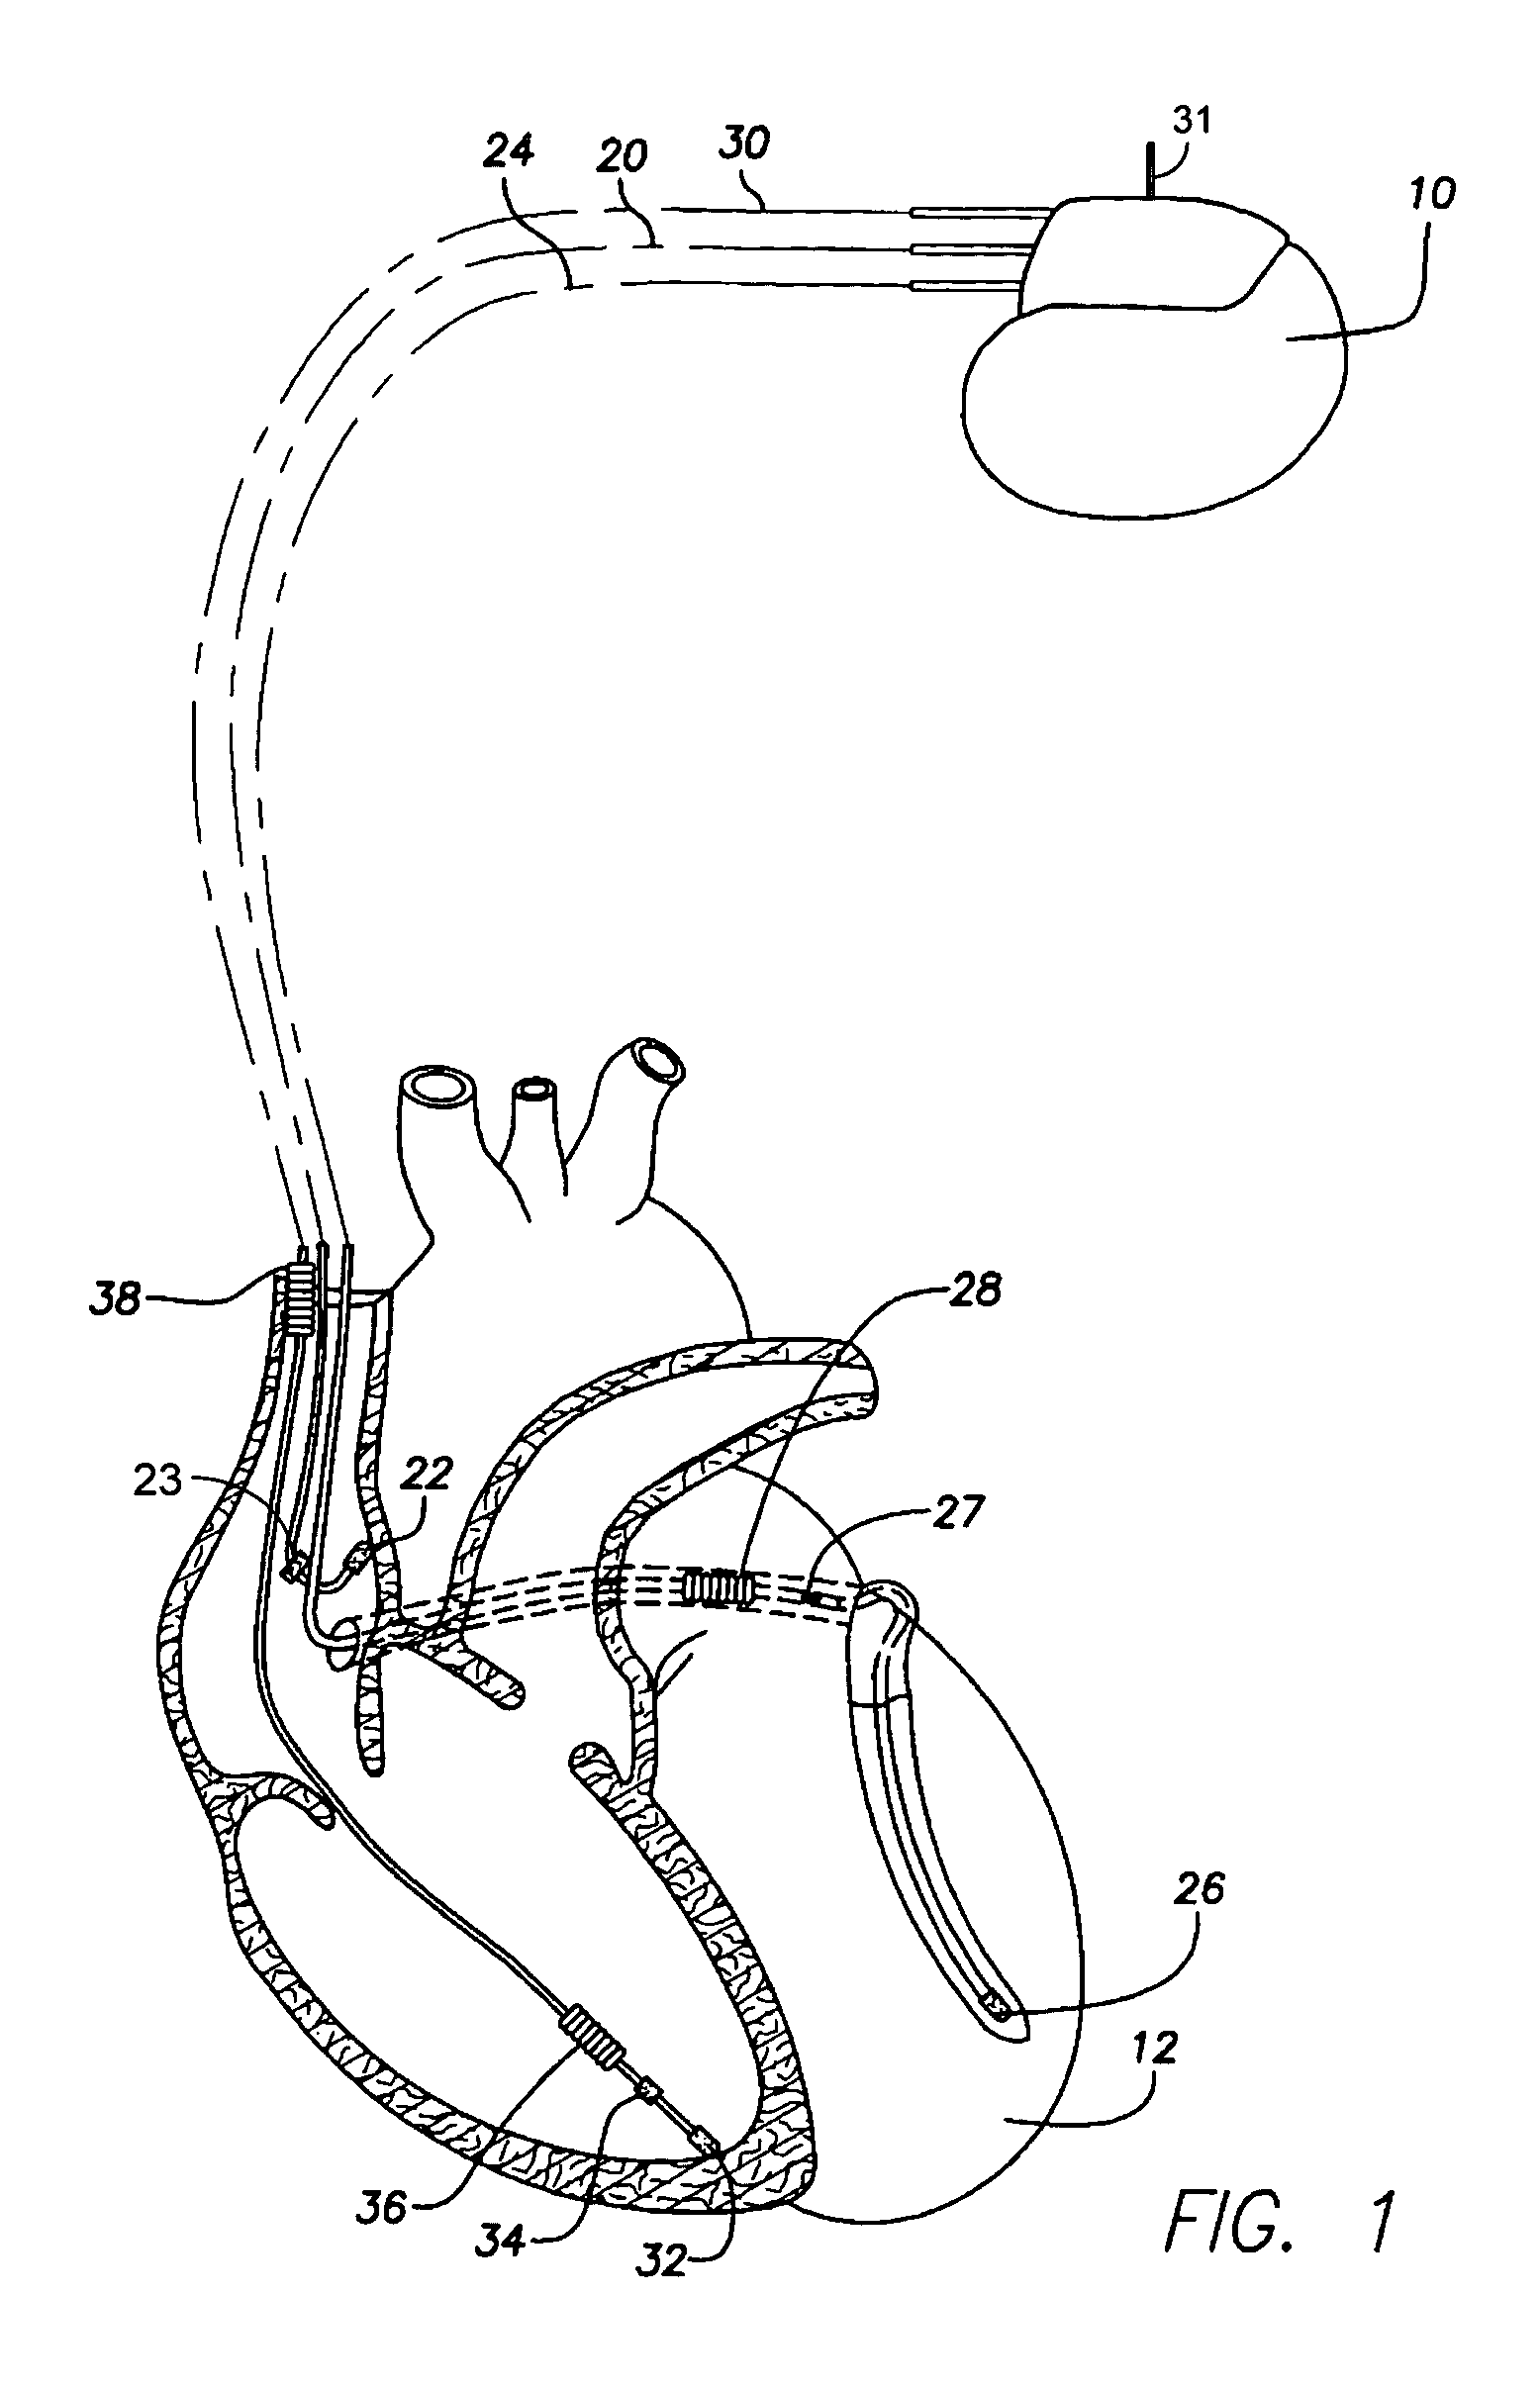 System and method for detecting cardiac ischemia using an implantable medical device